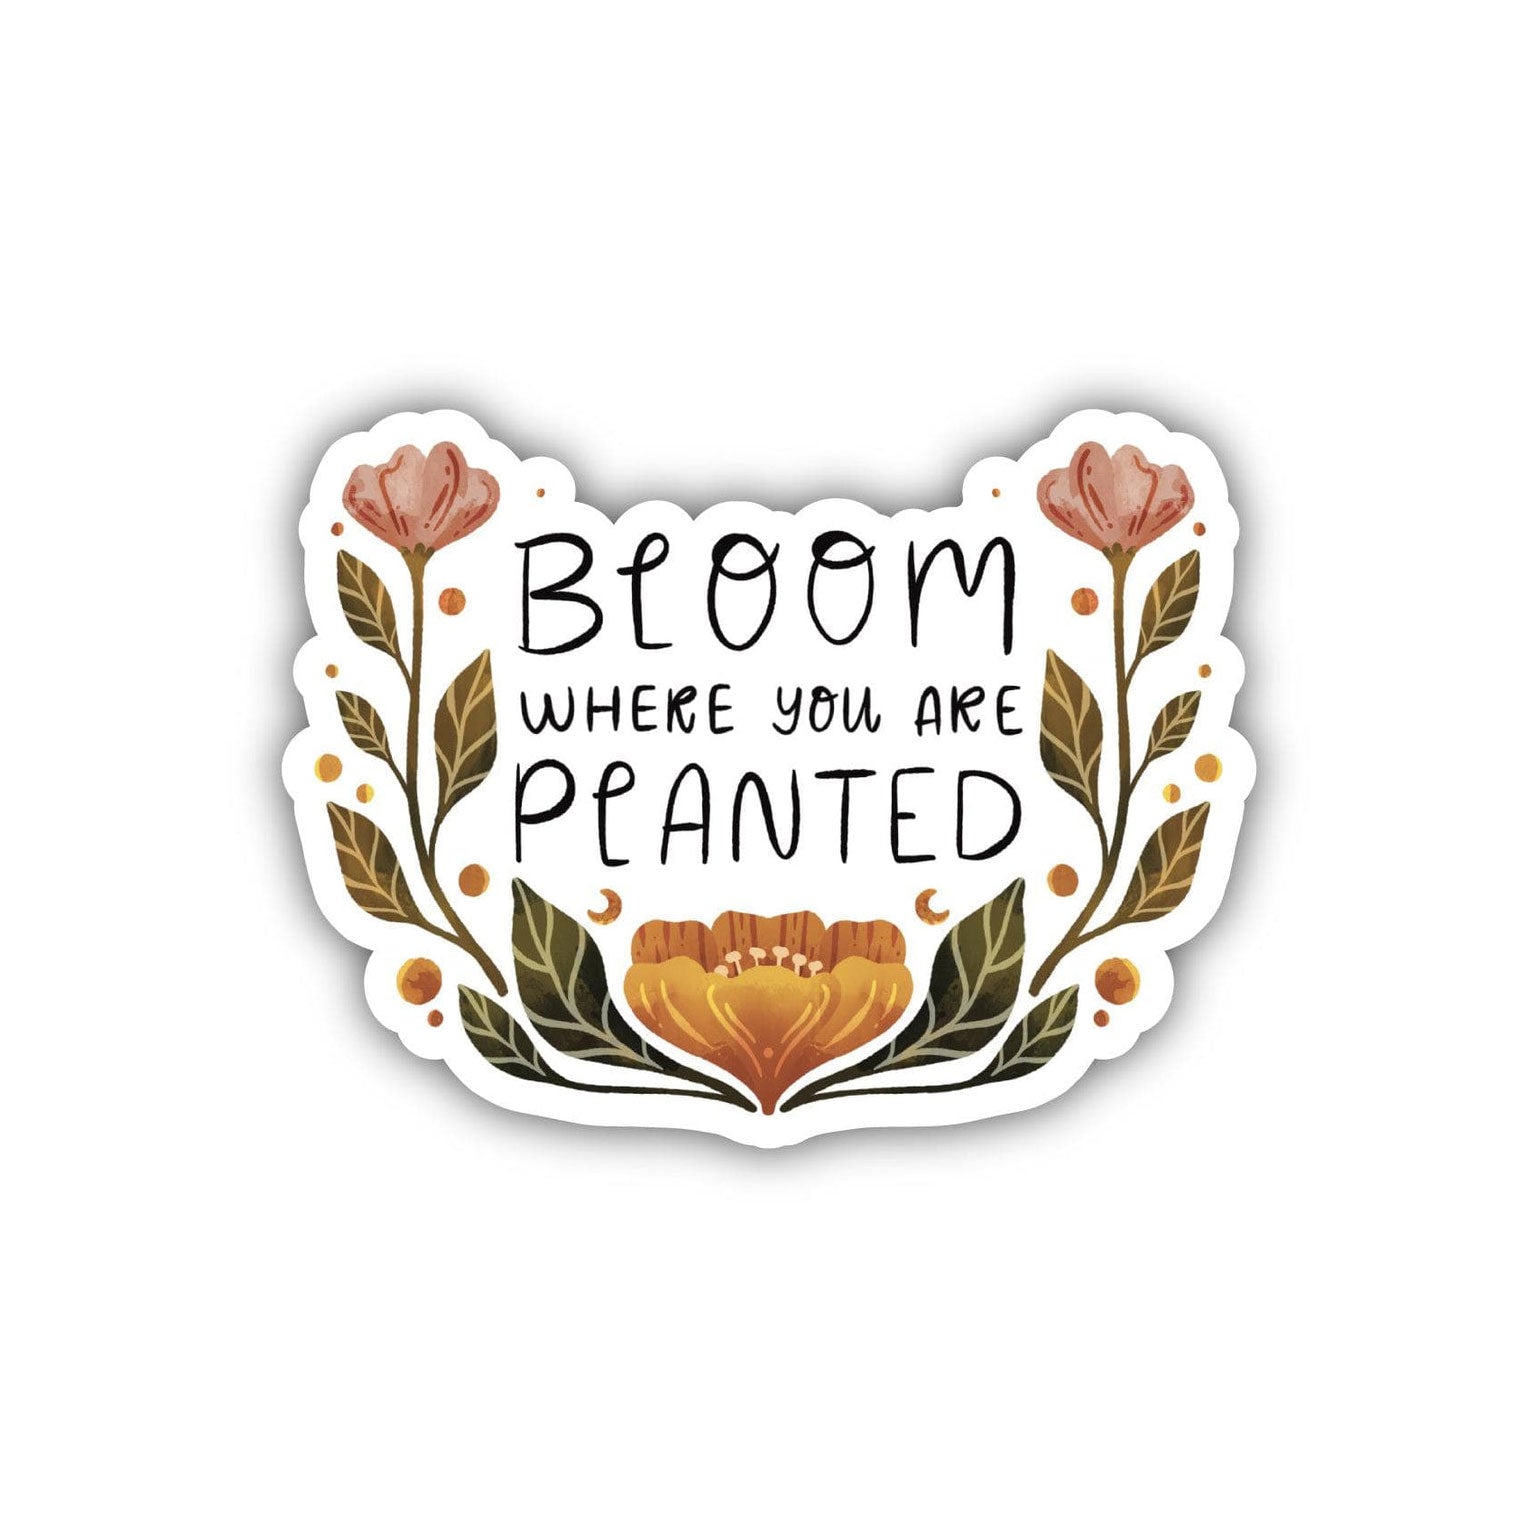 Big Moods Bloom Where You Are Planted Sticker - Multicolor Floral